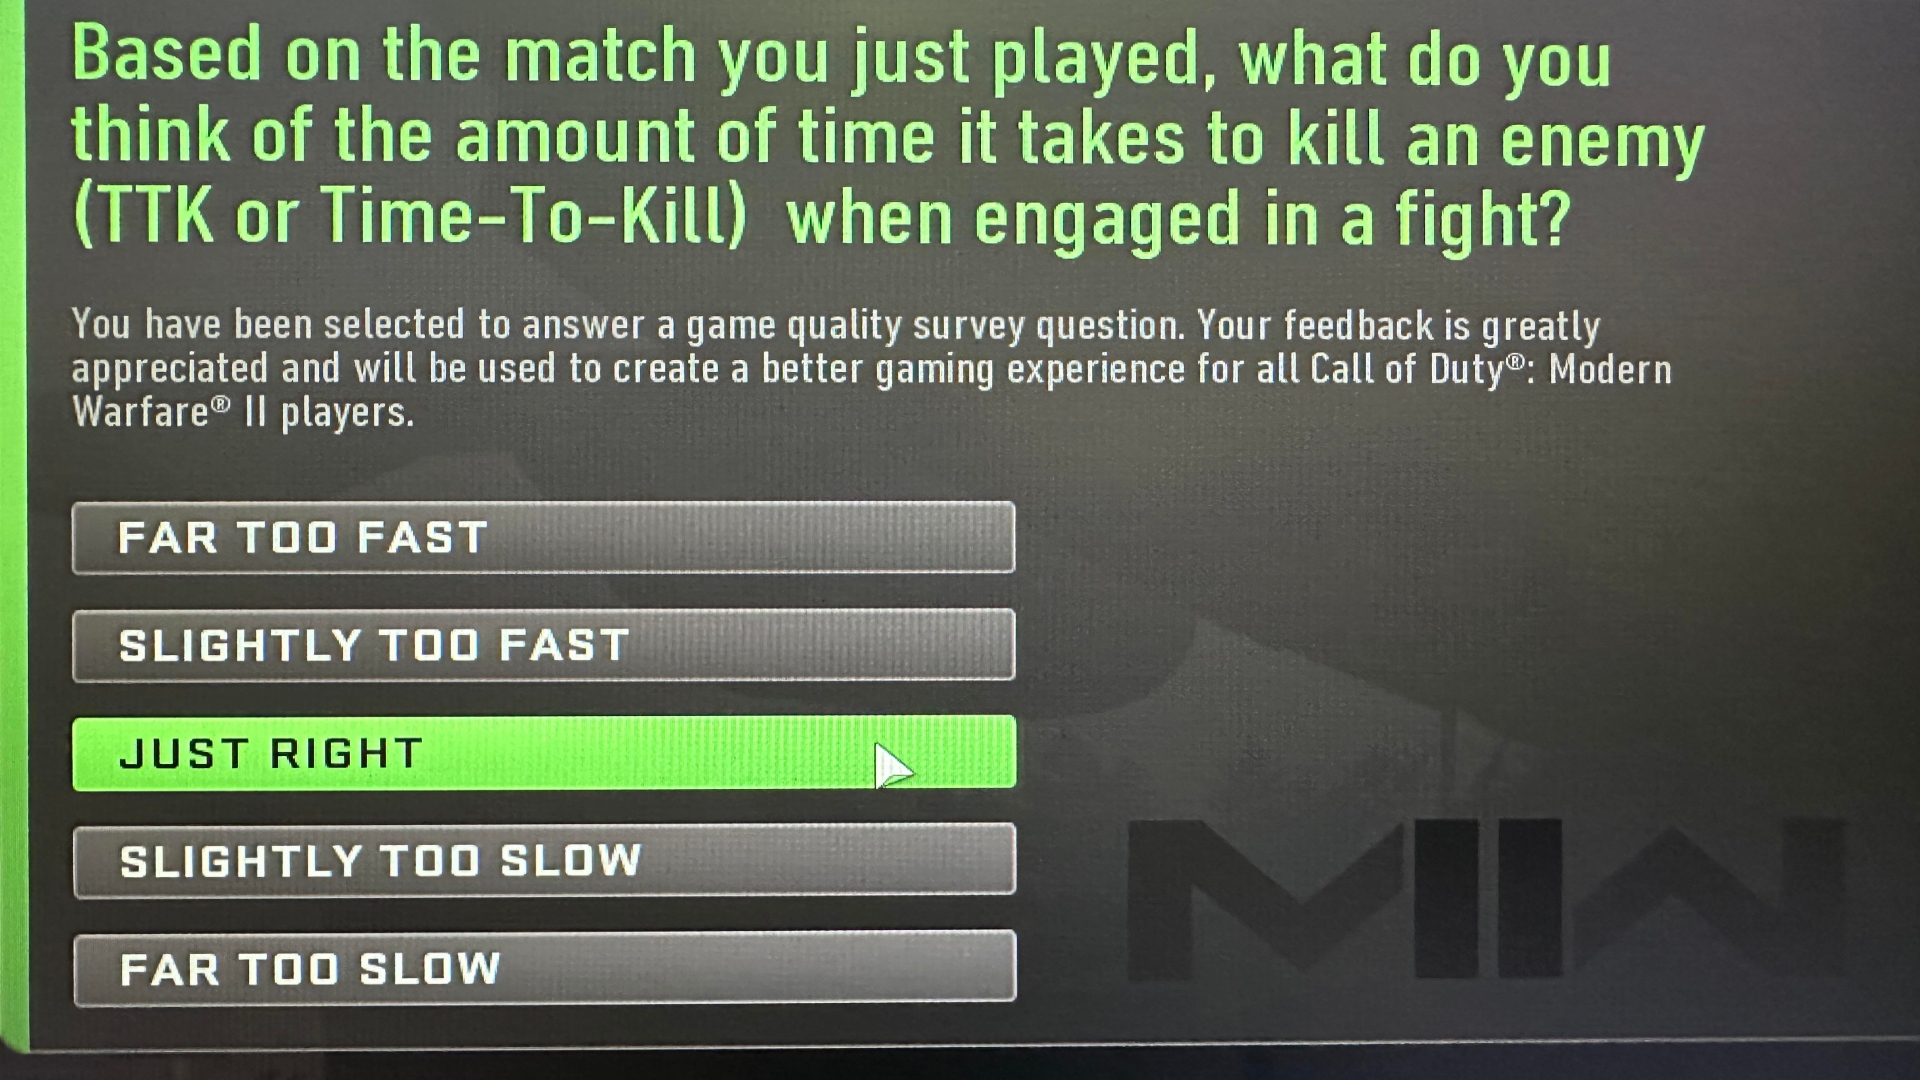 Call of Duty Modern Warfare 3 TTK: An image of a survey from FPS game CoD MW2